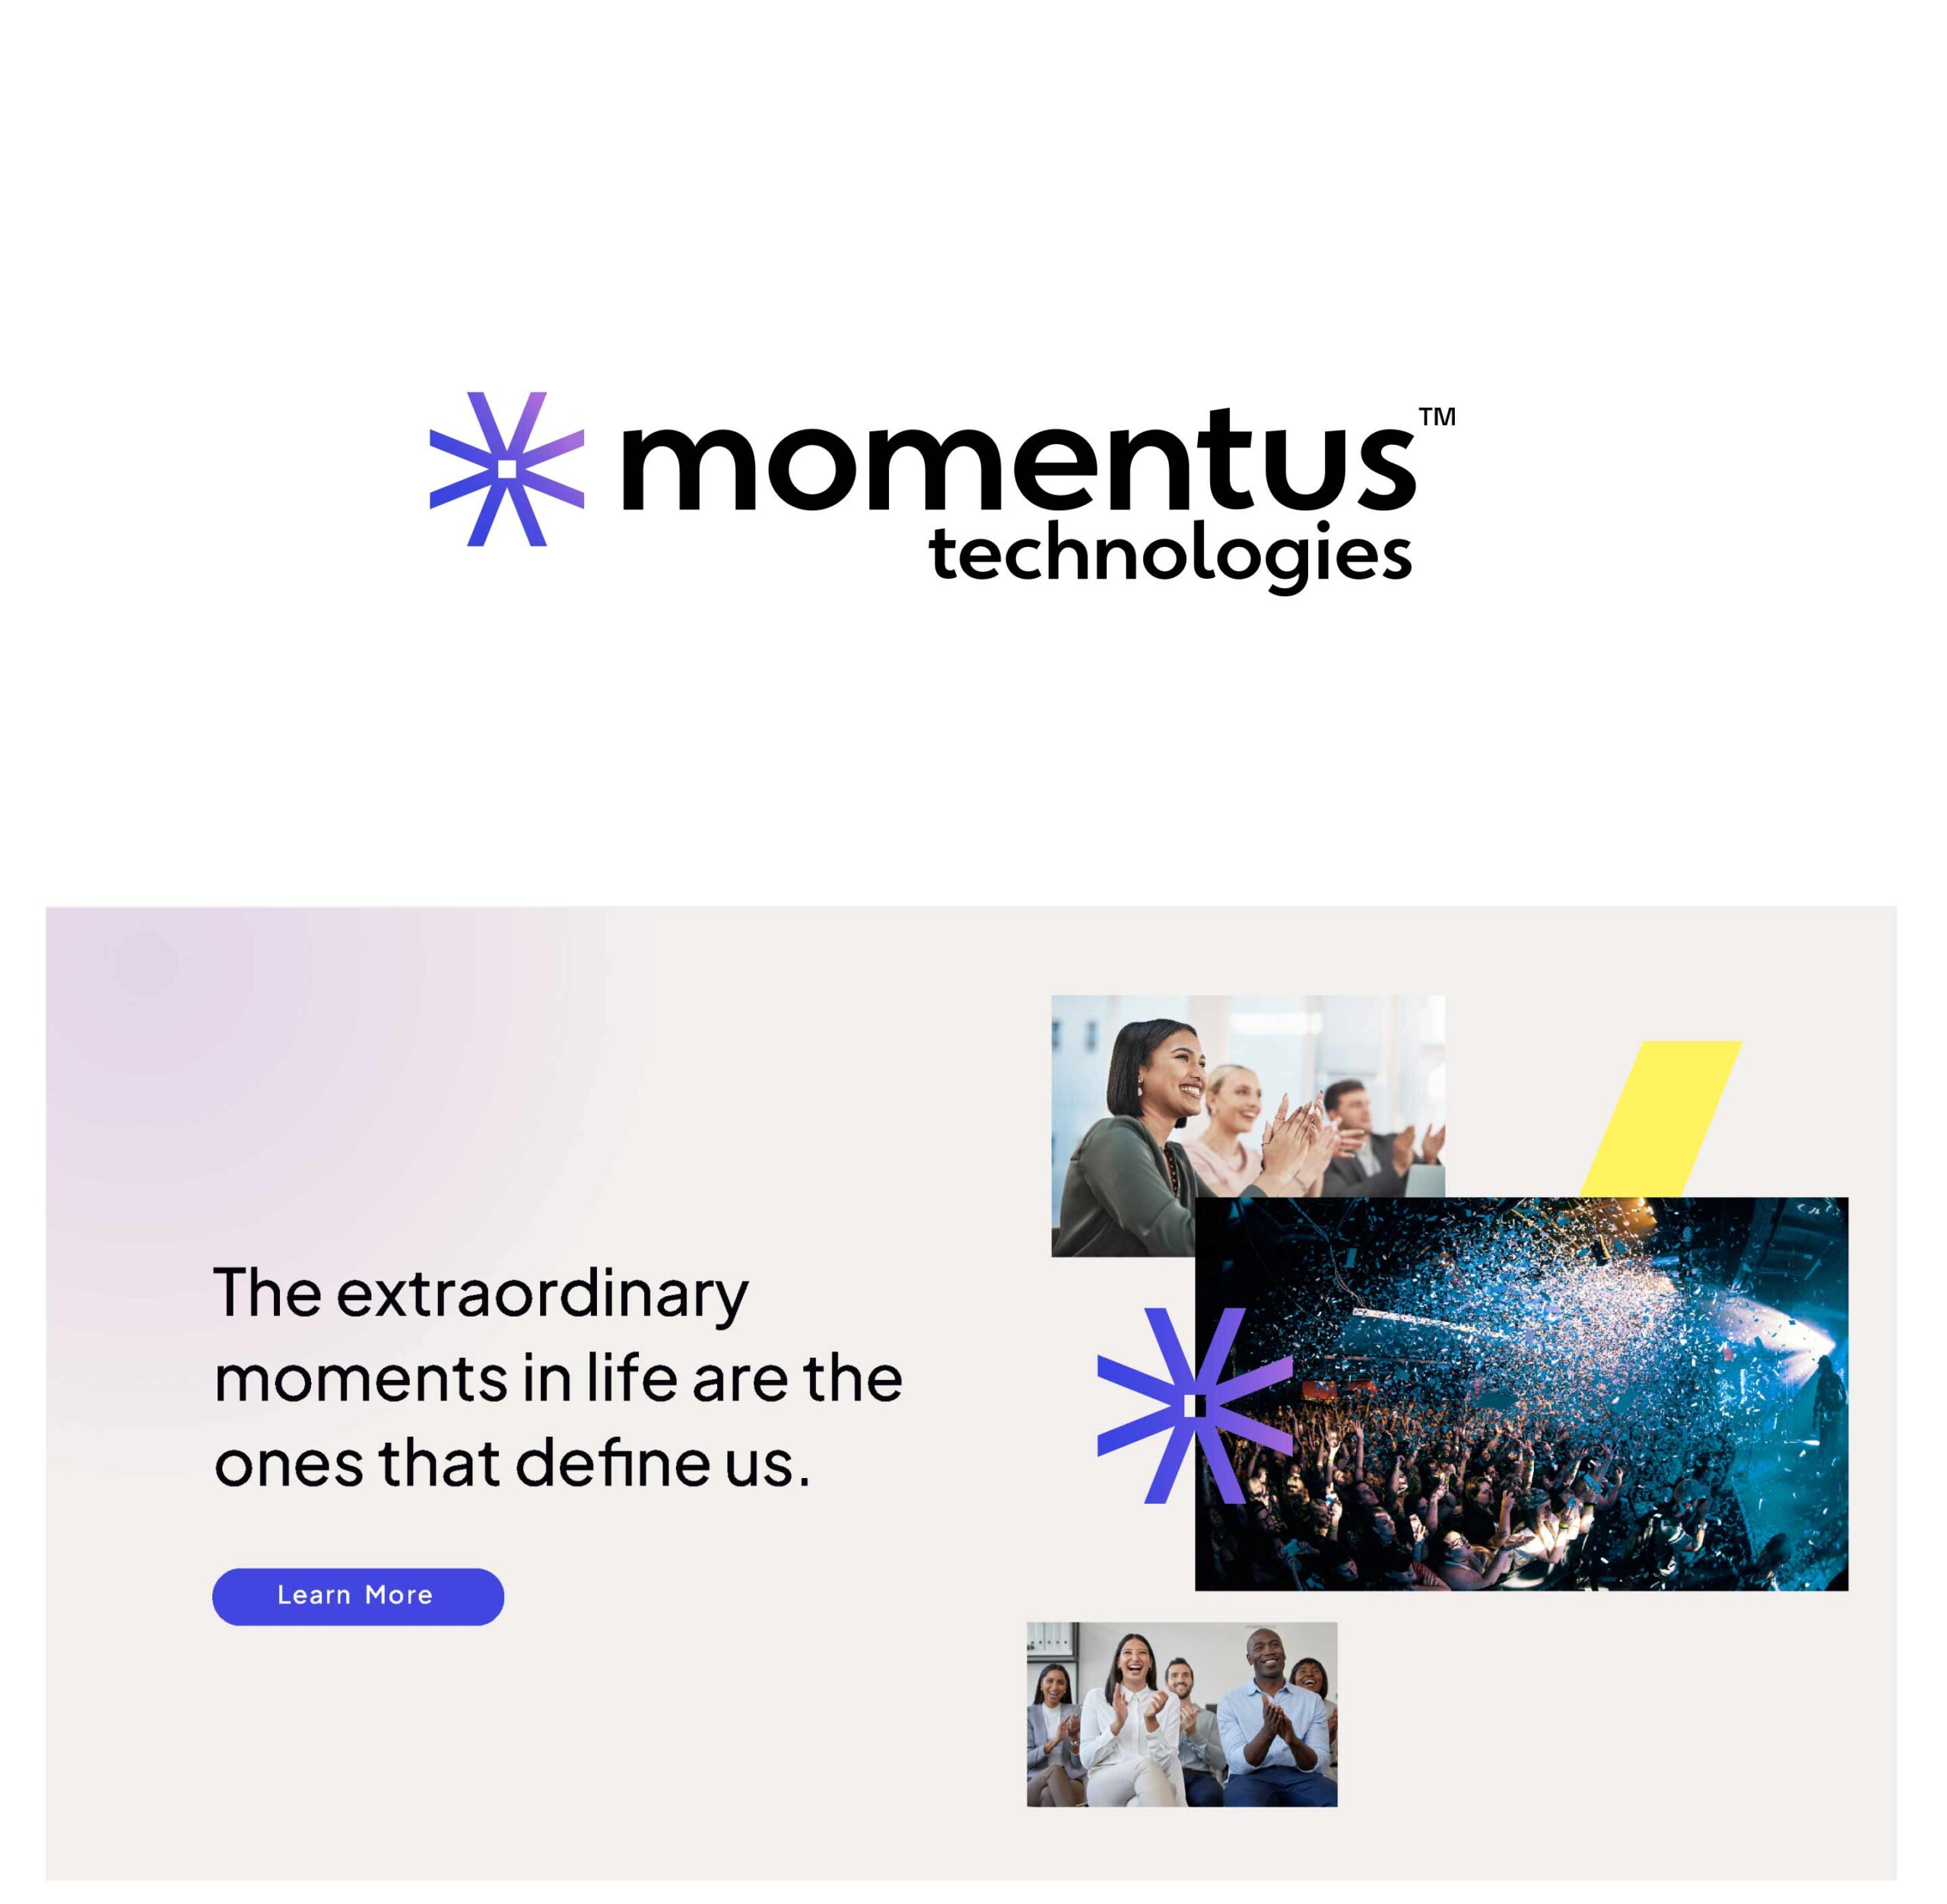 The new Momentus Technologies brand after the company rebranded from Ungerboeck